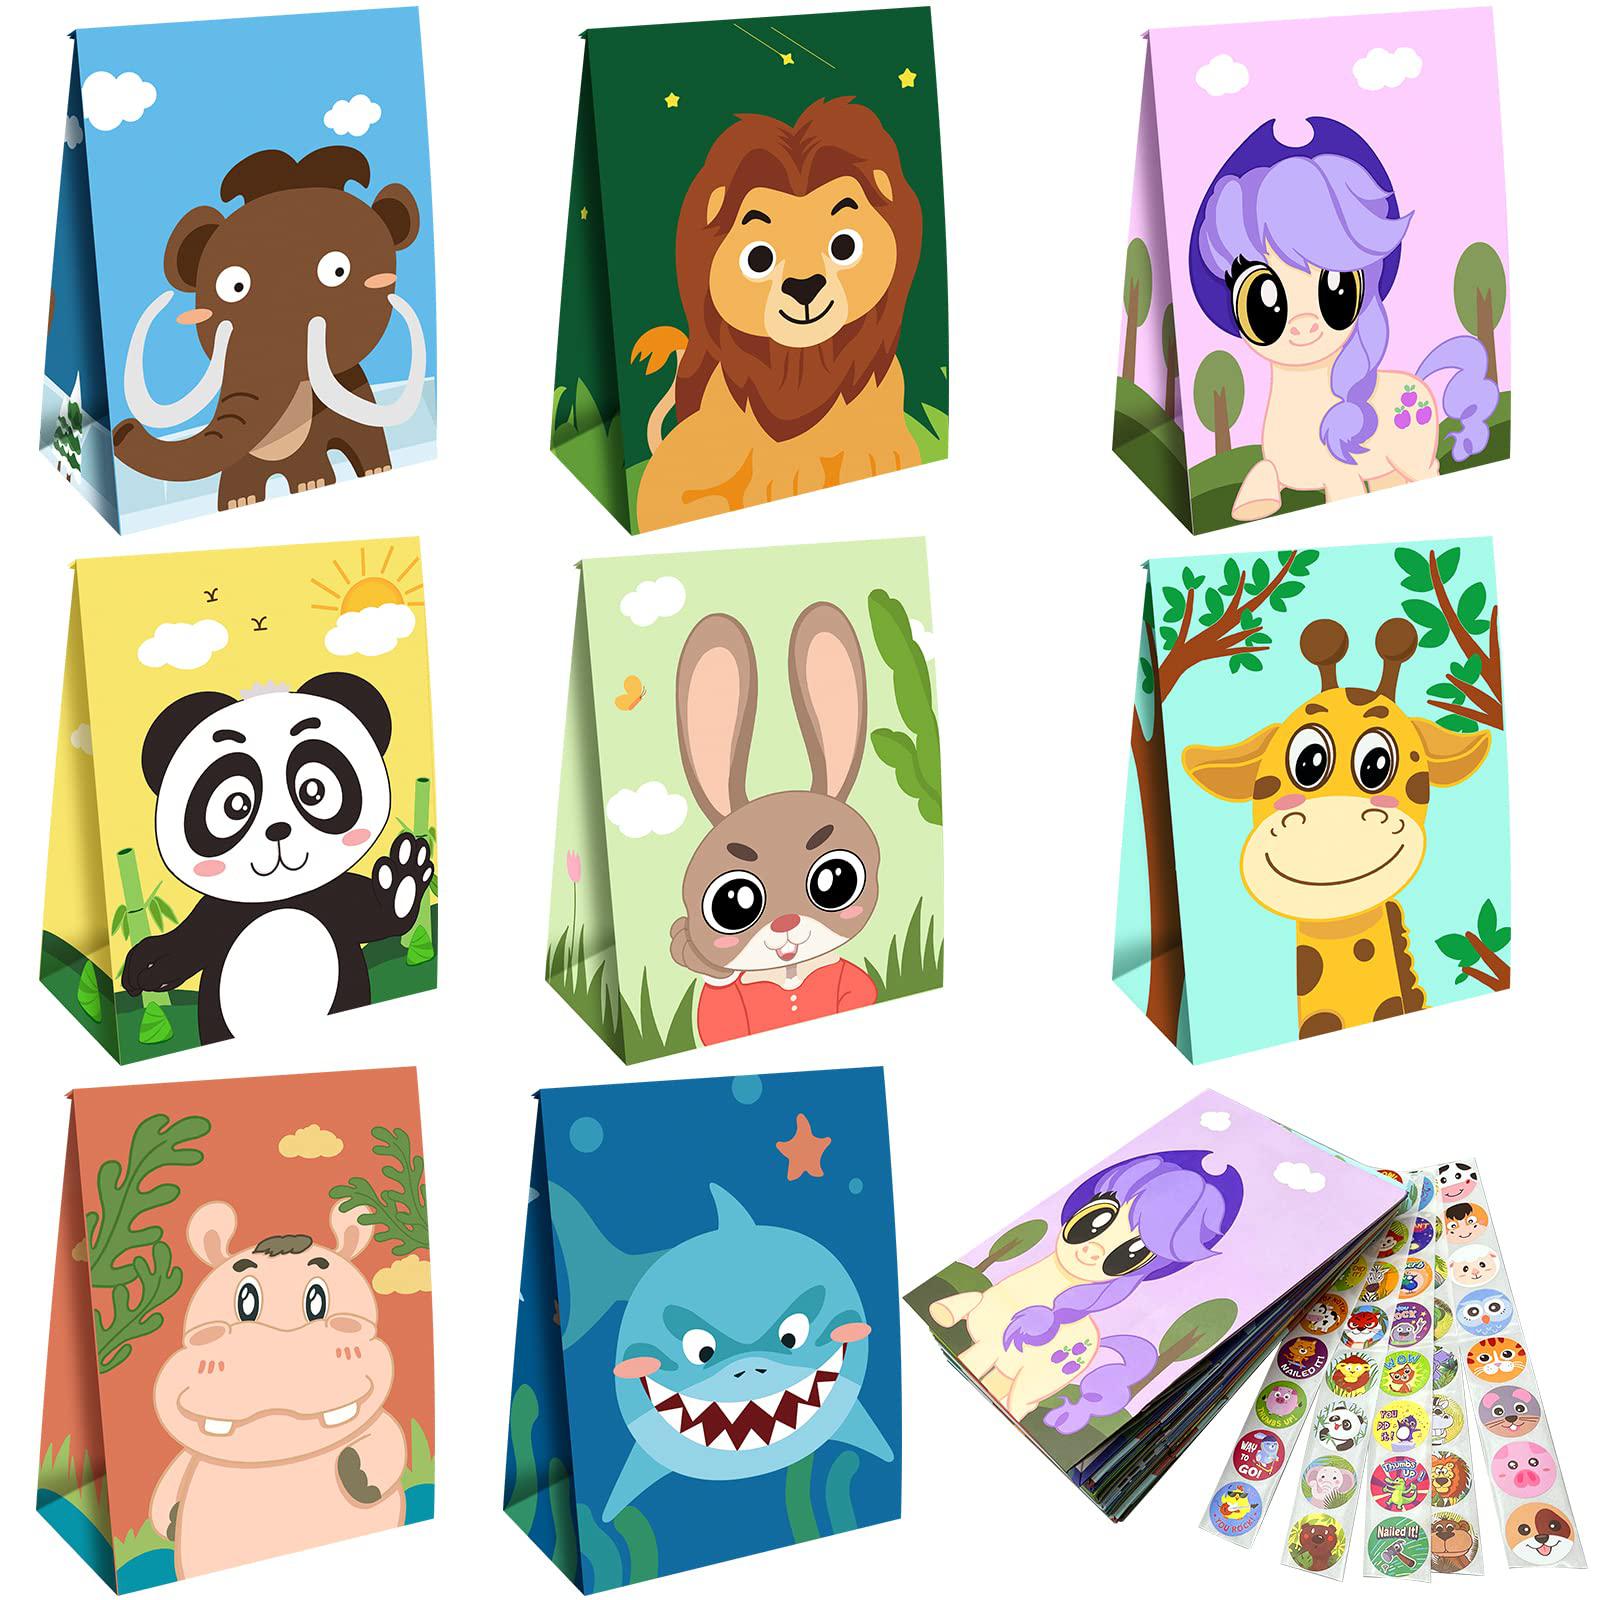 jiftok 24 pcs party favor bags for kids birthday party gift, animal goodie treat bags with 40 pcs sticker for baby shower dec